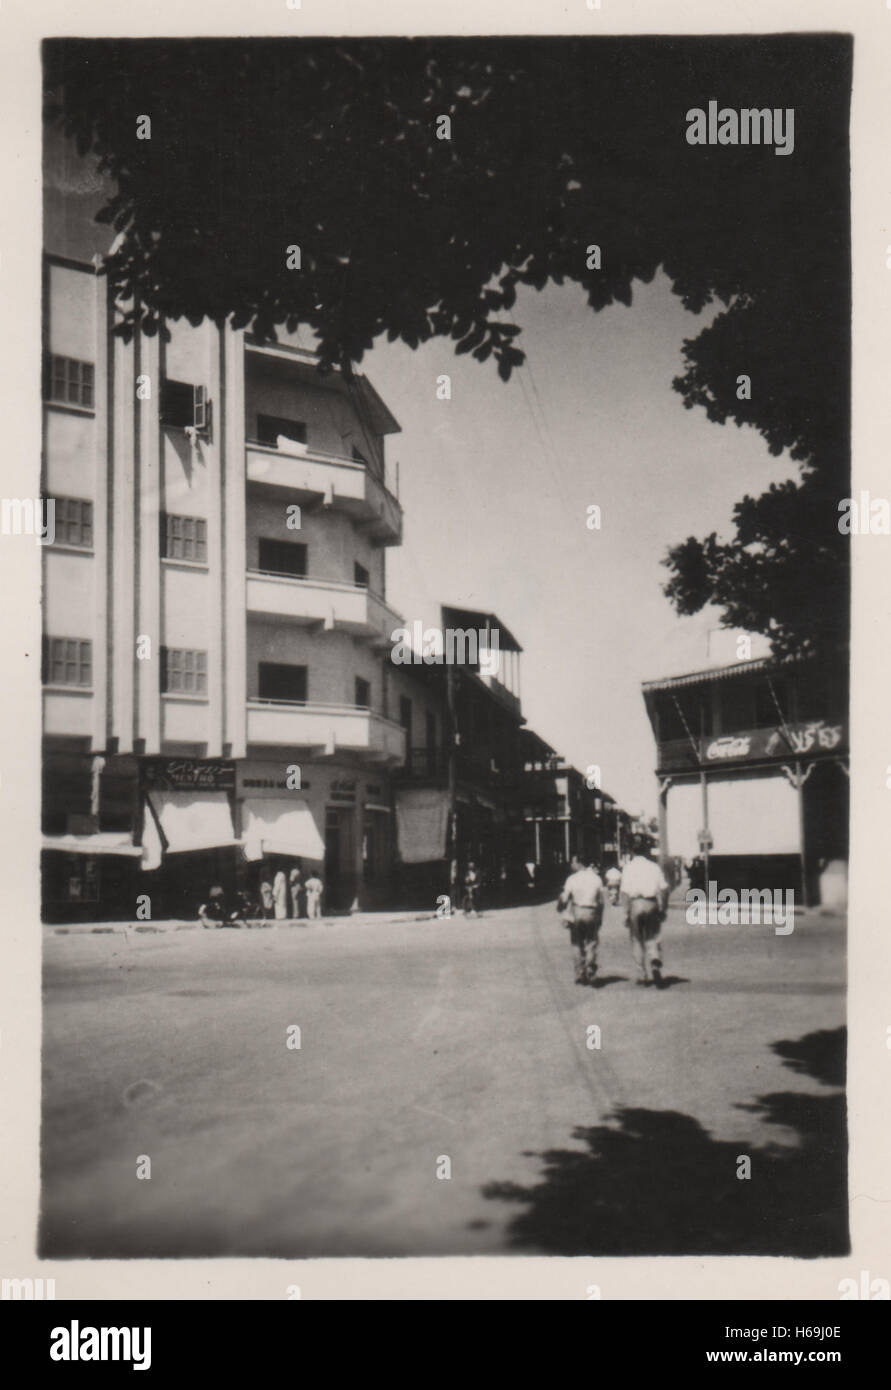 Negrelli Street now called El Gaish Street in Ismailia Egypt with city buildings in the background in the period prior to the British withdrawal from Egypt and the Suez crisis. Photographed in 1952 Stock Photo